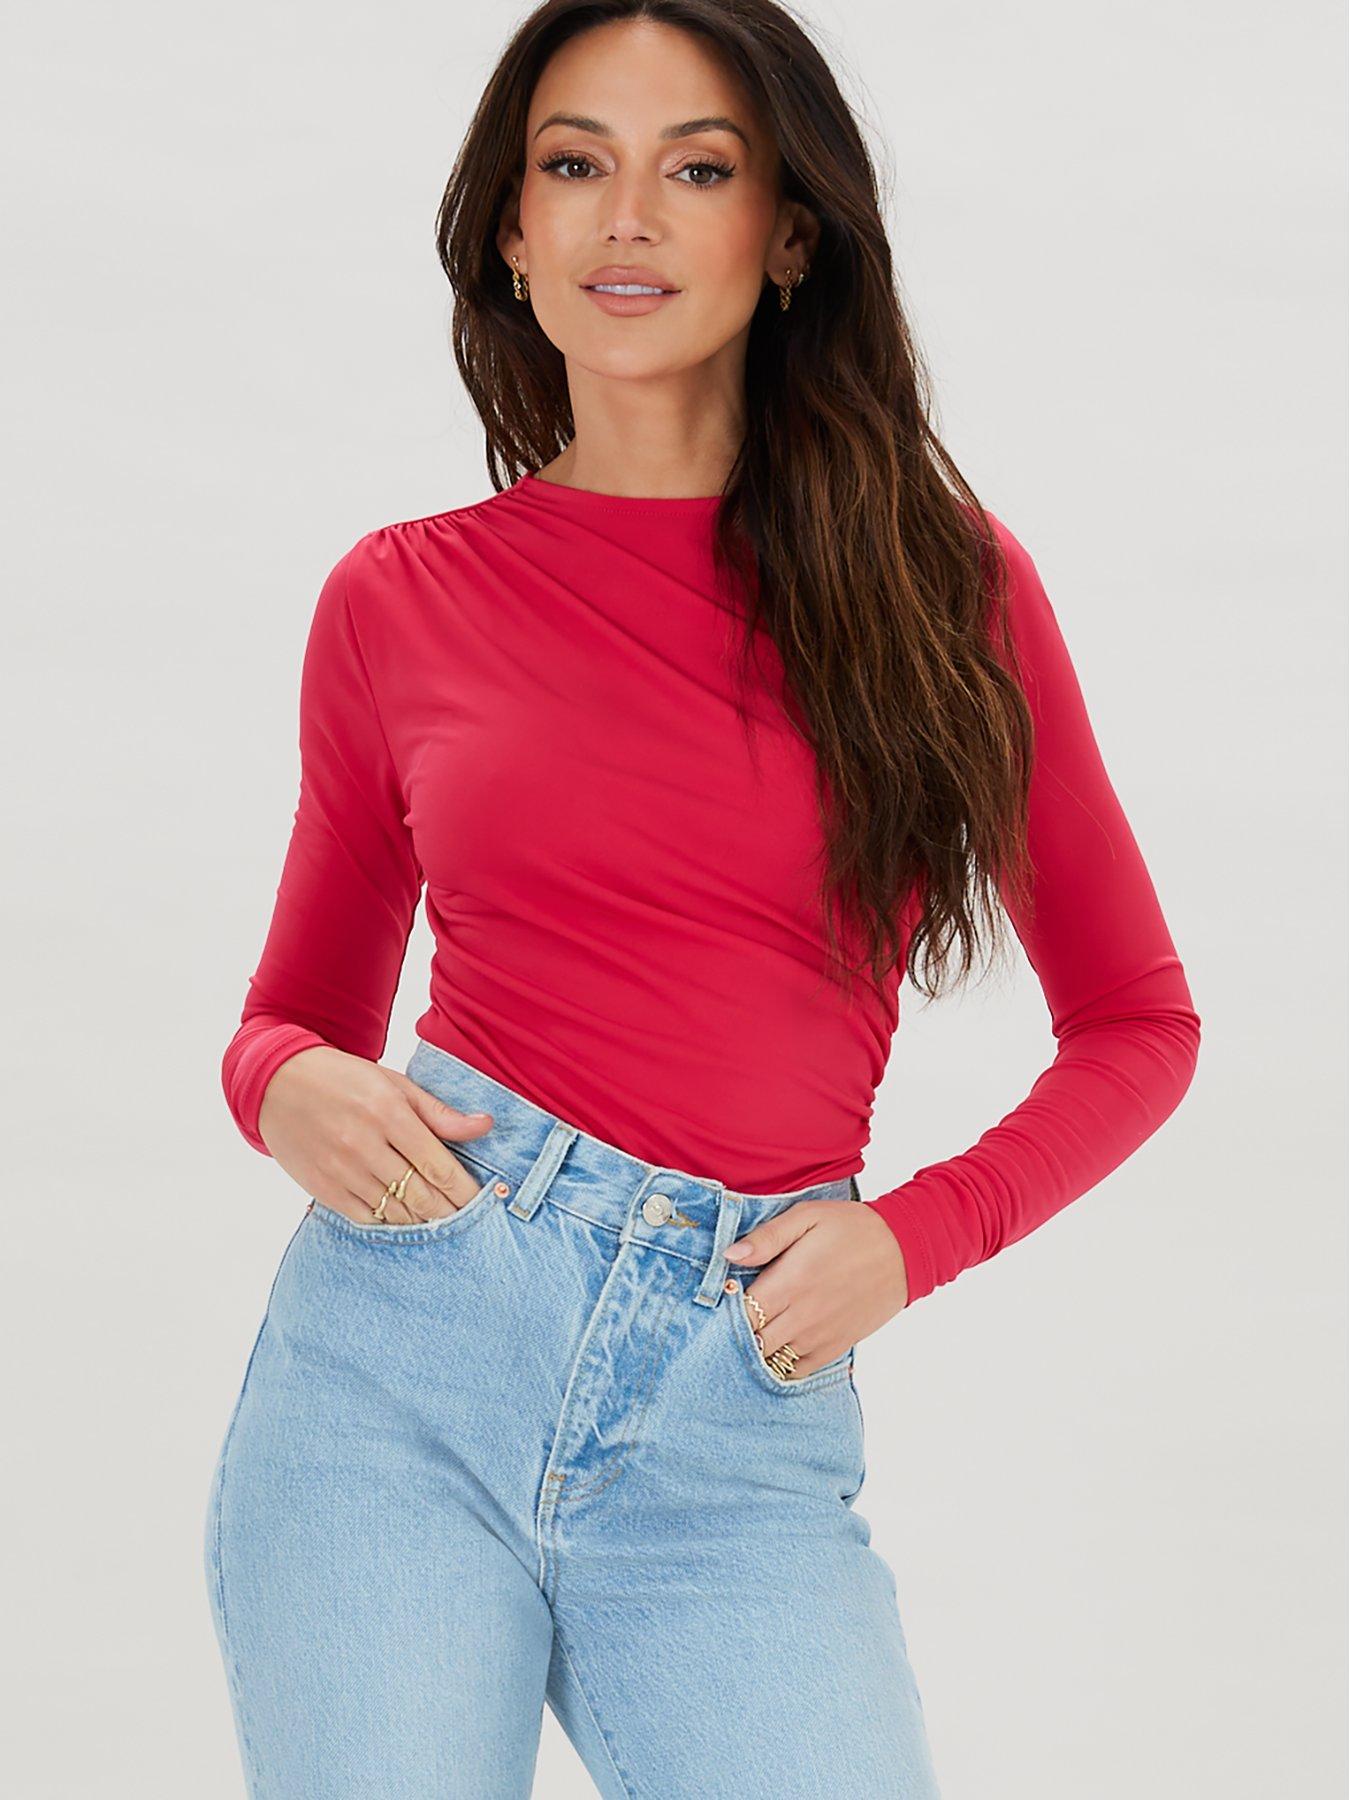 Michelle Keegan Ruched Front Detail Long Sleeve Top - Pink | very.co.uk